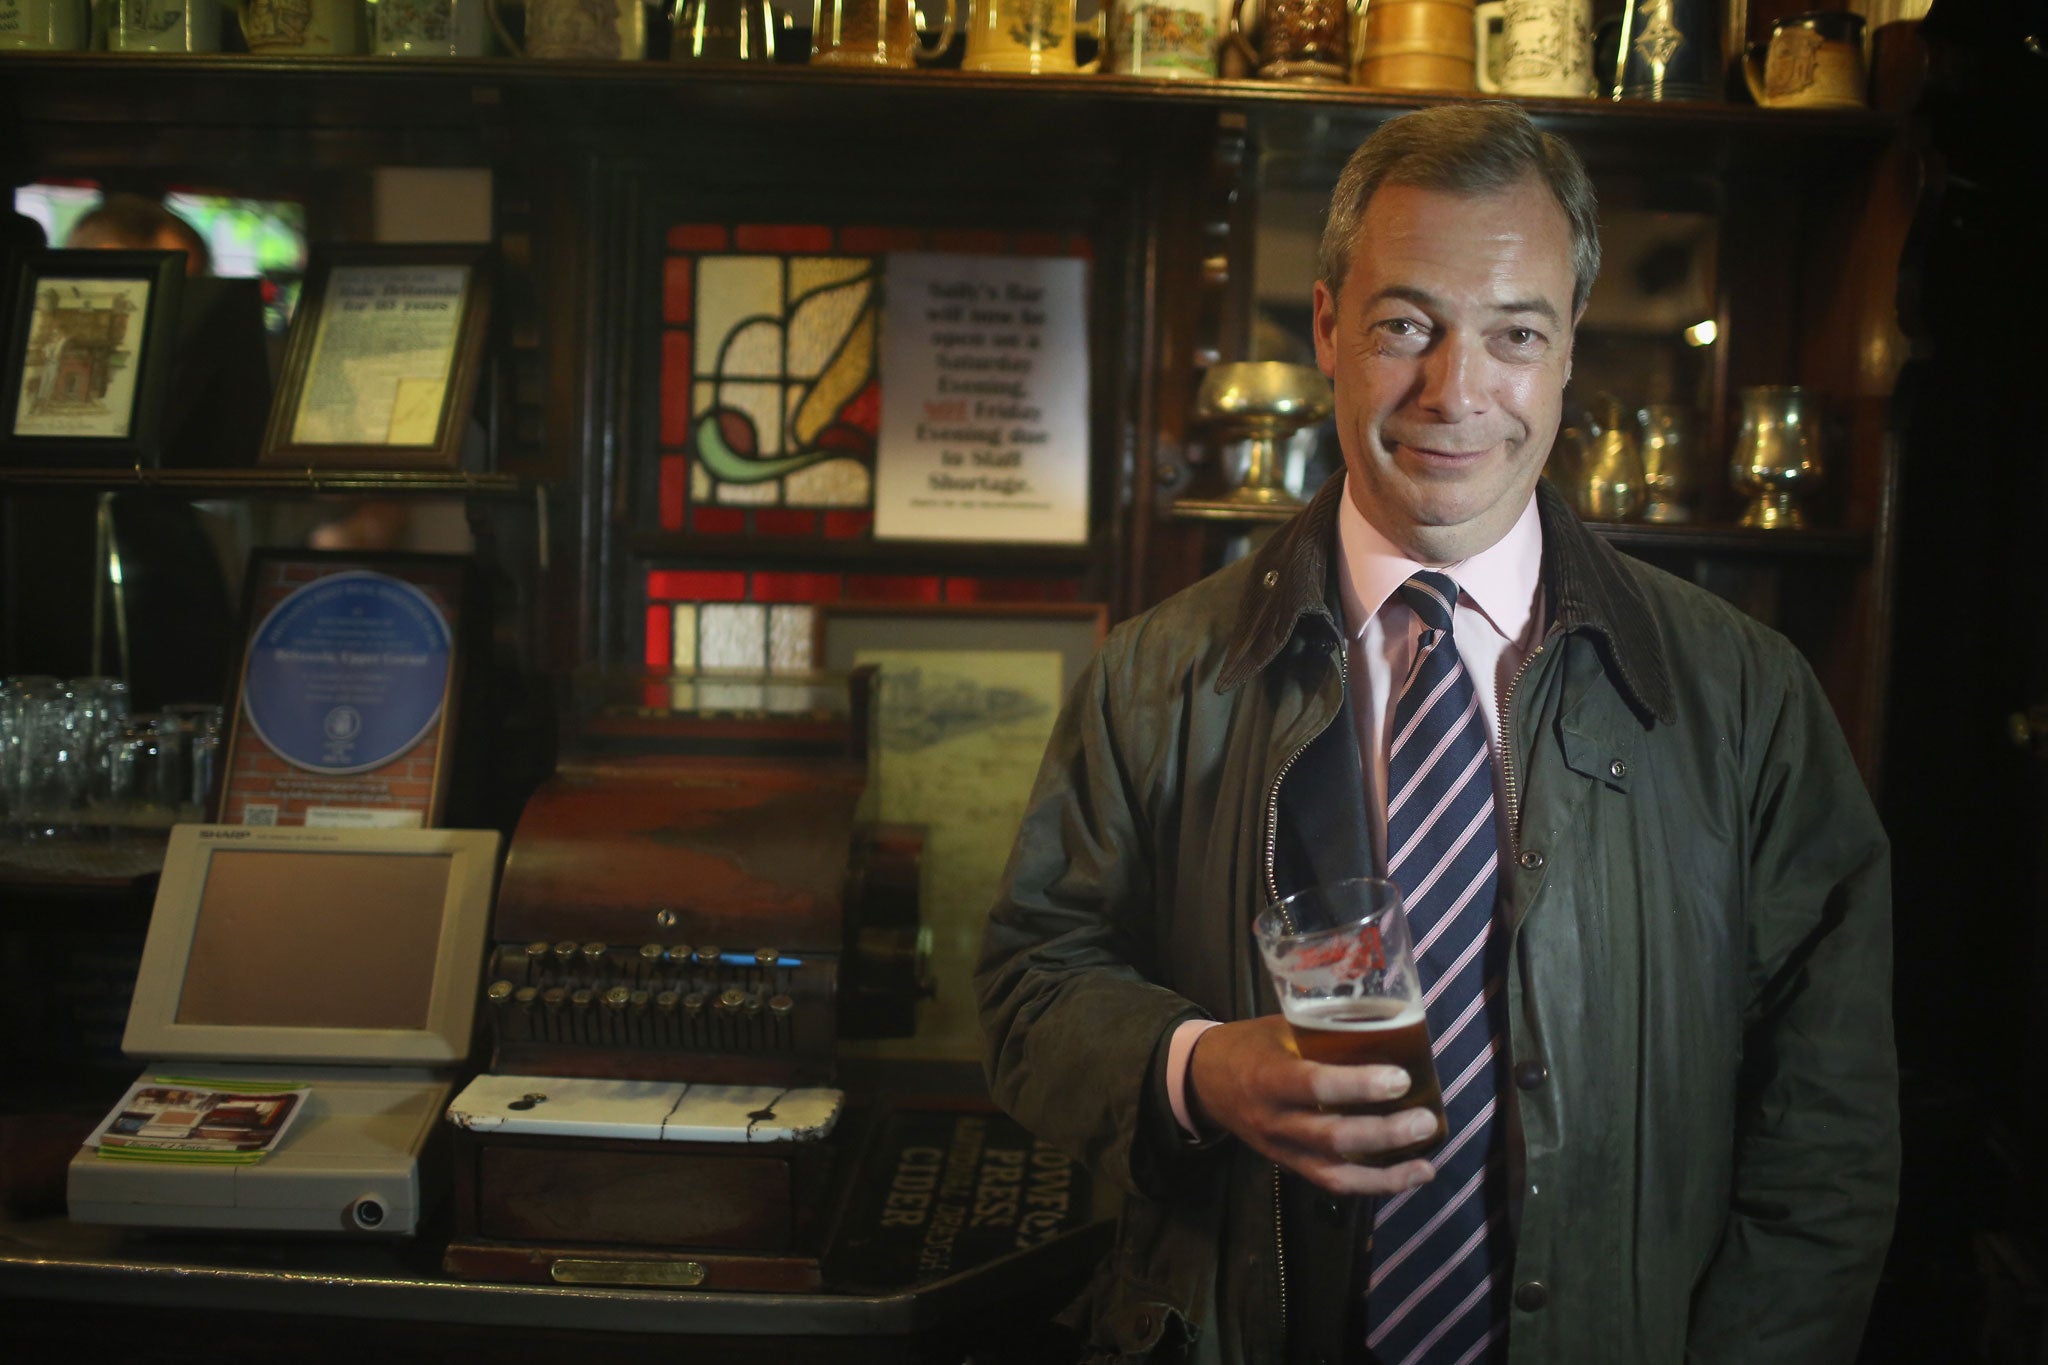 Behind the times: Nigel Farage yearns for the boozy long lunches and unregulated capitalism of a bygone era